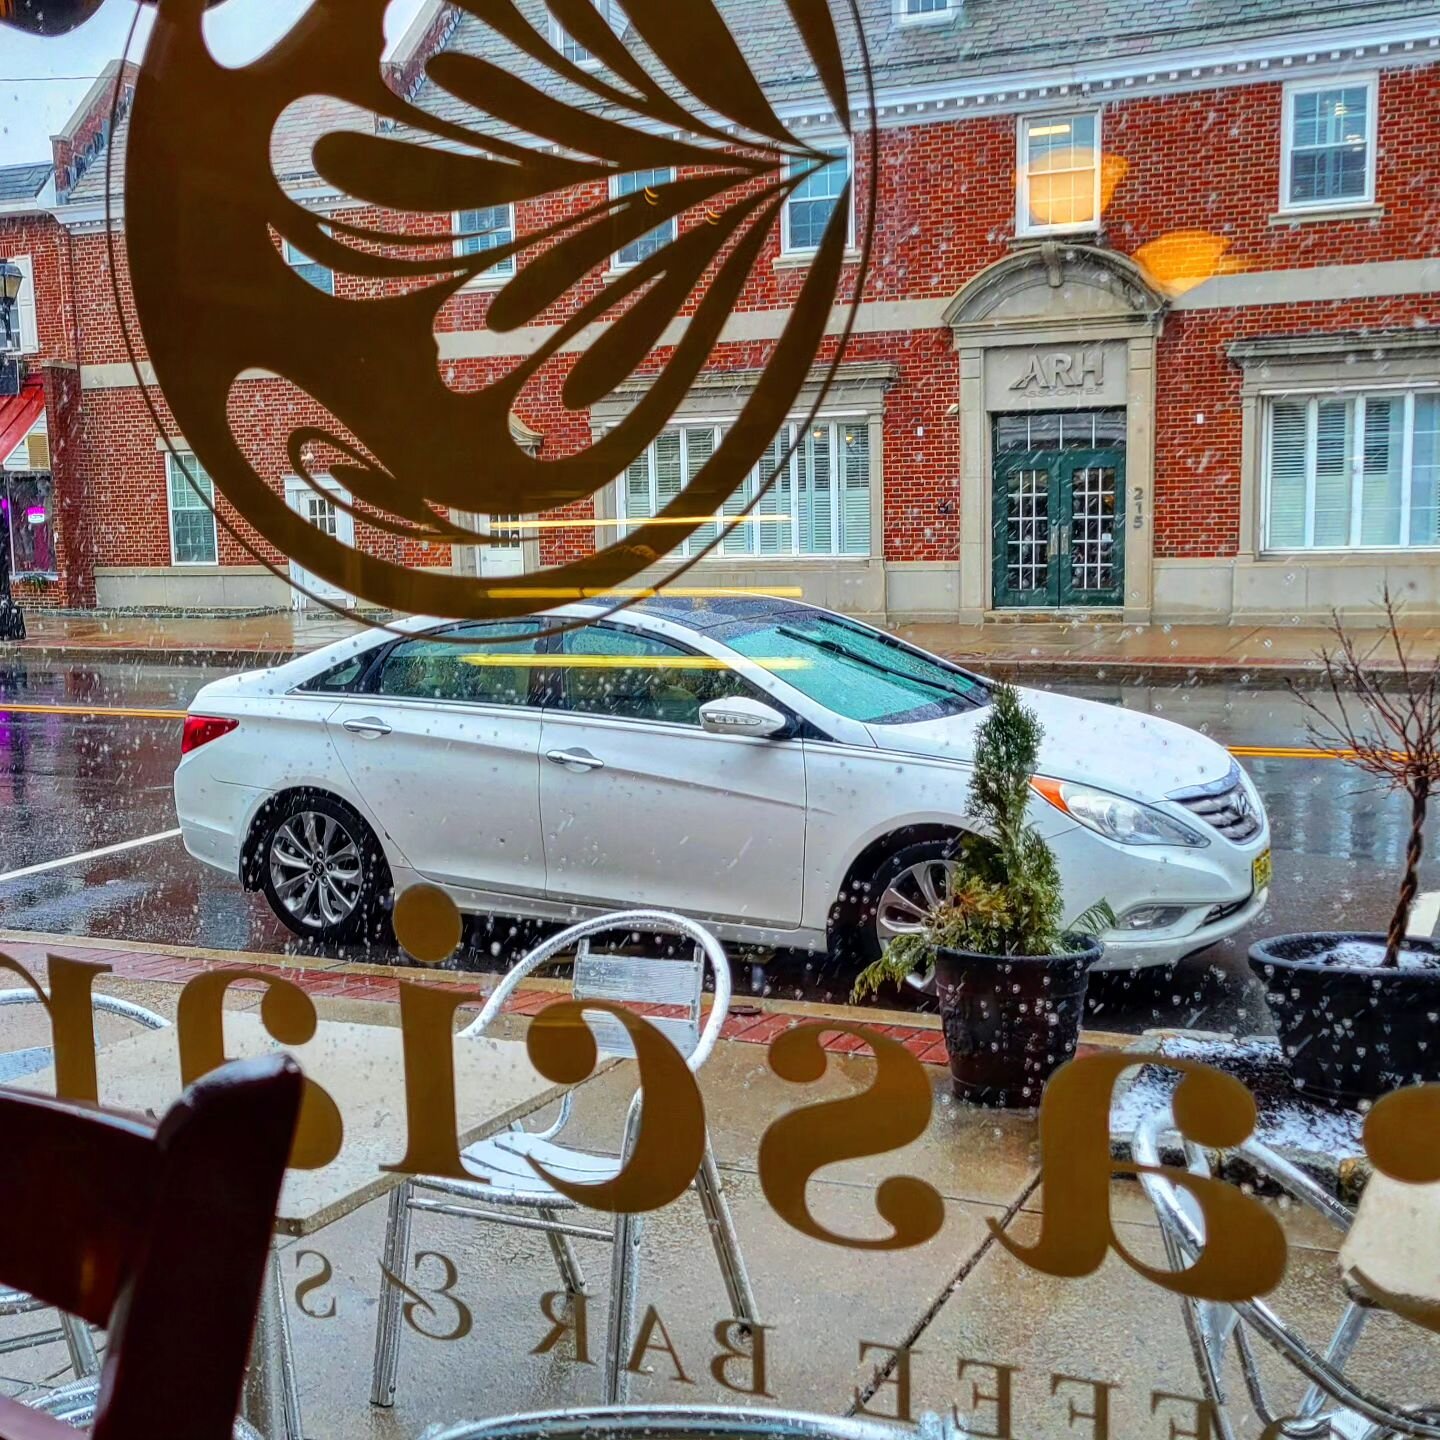 It's really coming down! Be safe, @downtown.hammonton! We are open currently, but stay tuned for updates!

Stop by for a hot coffee or hot cocoa on your way home!